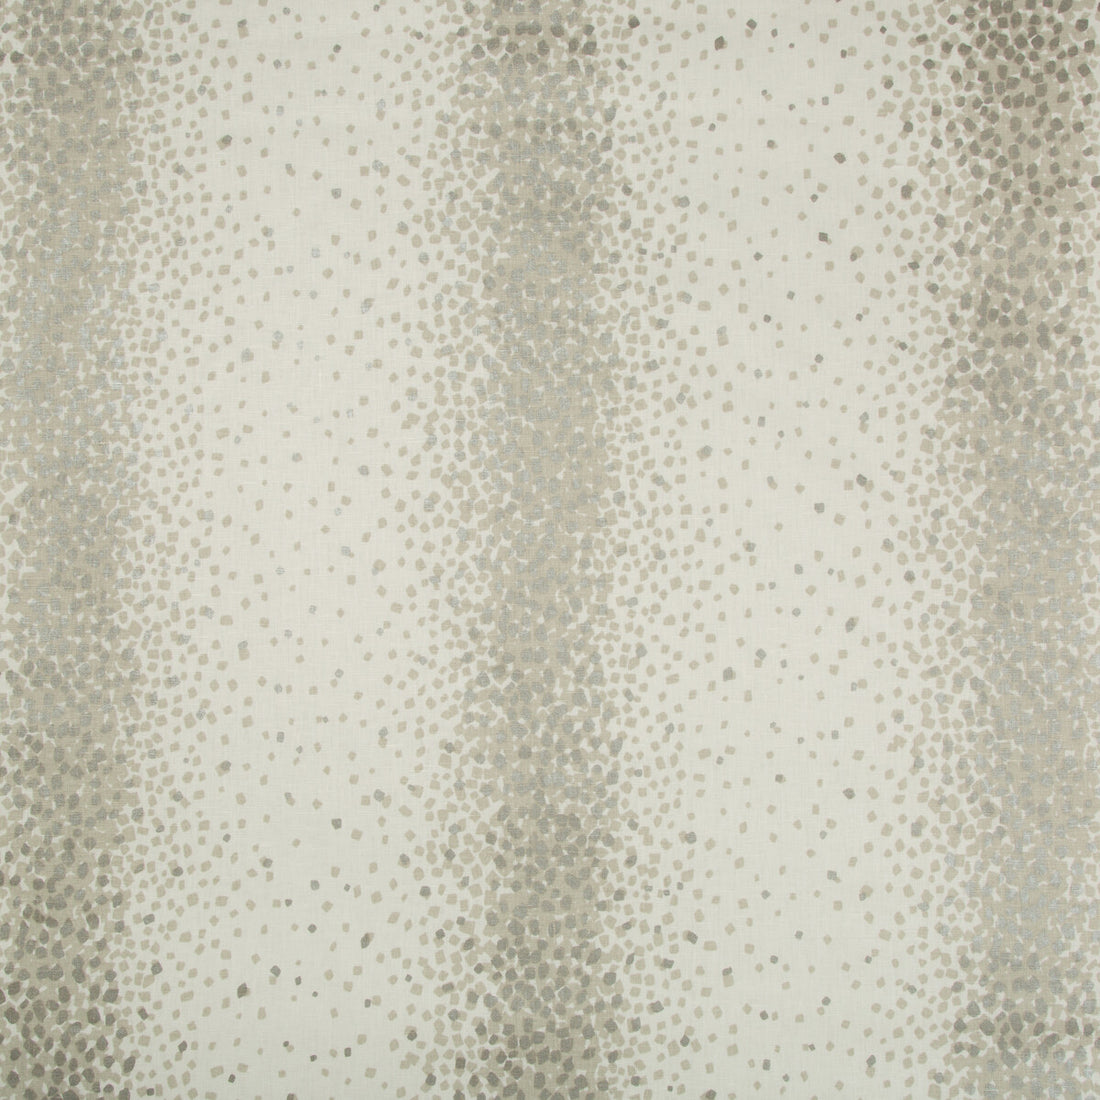 Jaunty fabric in linen color - pattern JAUNTY.11.0 - by Kravet Basics in the Thom Filicia Altitude collection